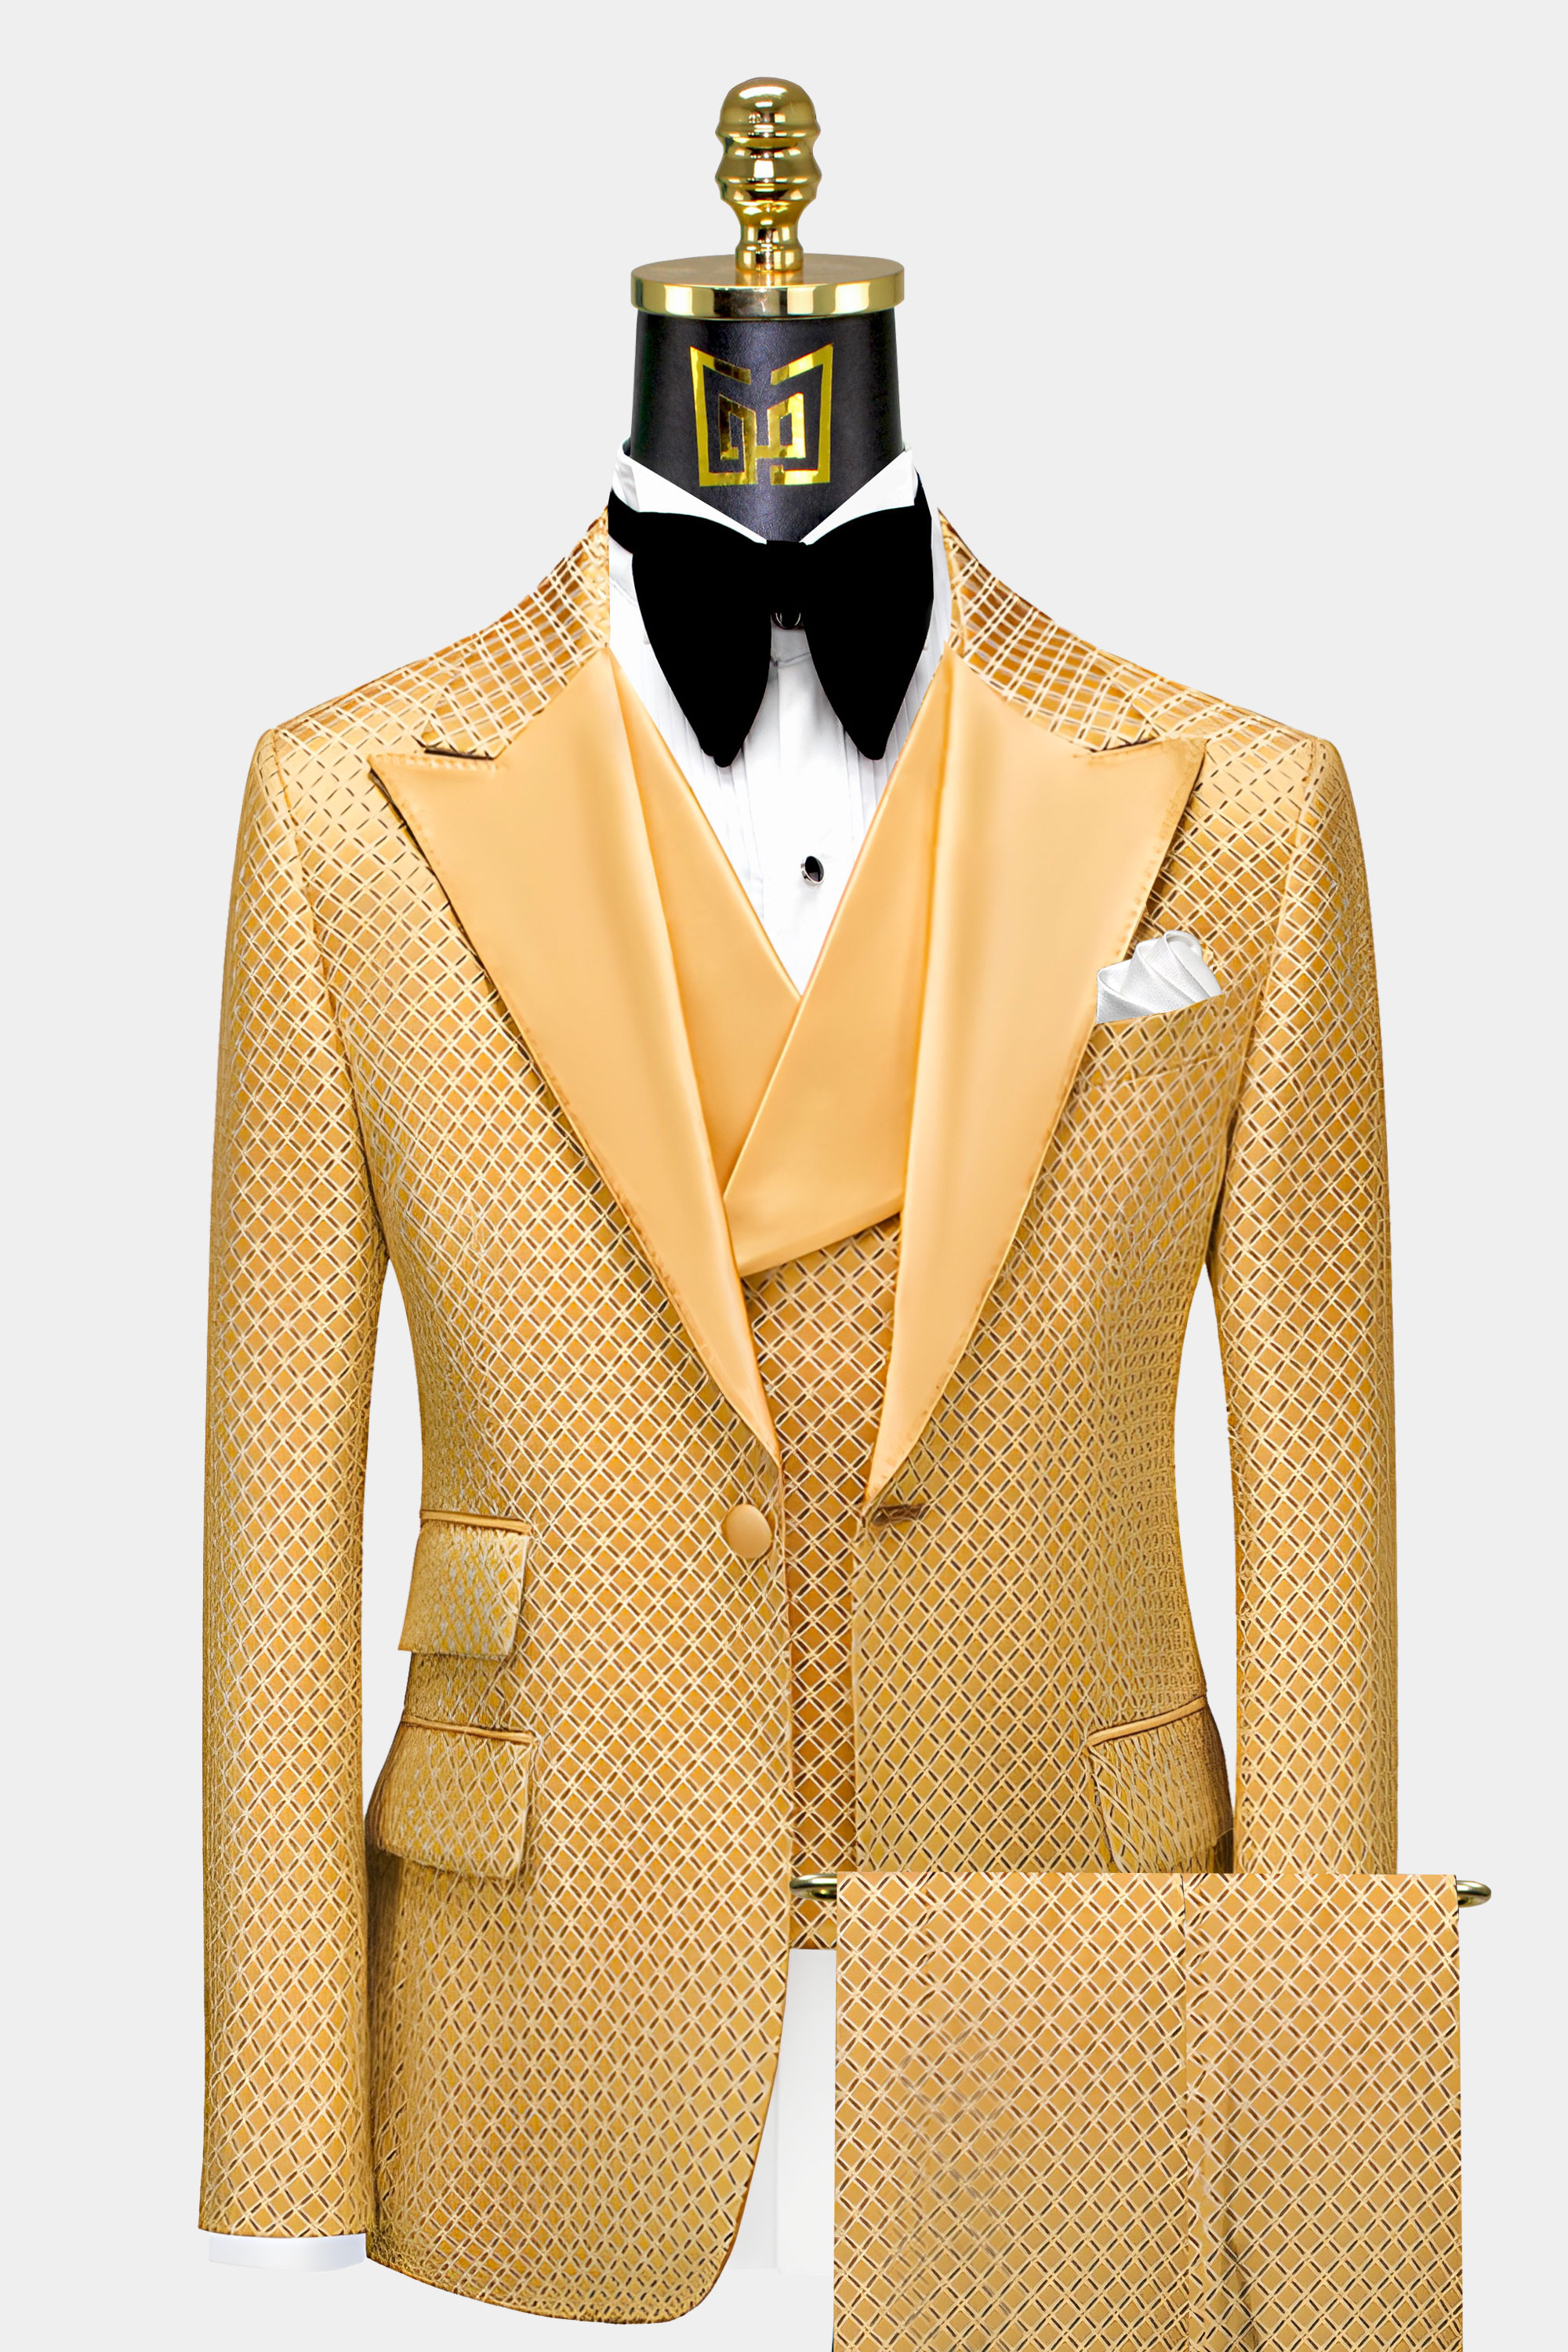 Tuxedo 3 Piece Suit For Men in Rohtak at best price by Golden Leaf -  Justdial